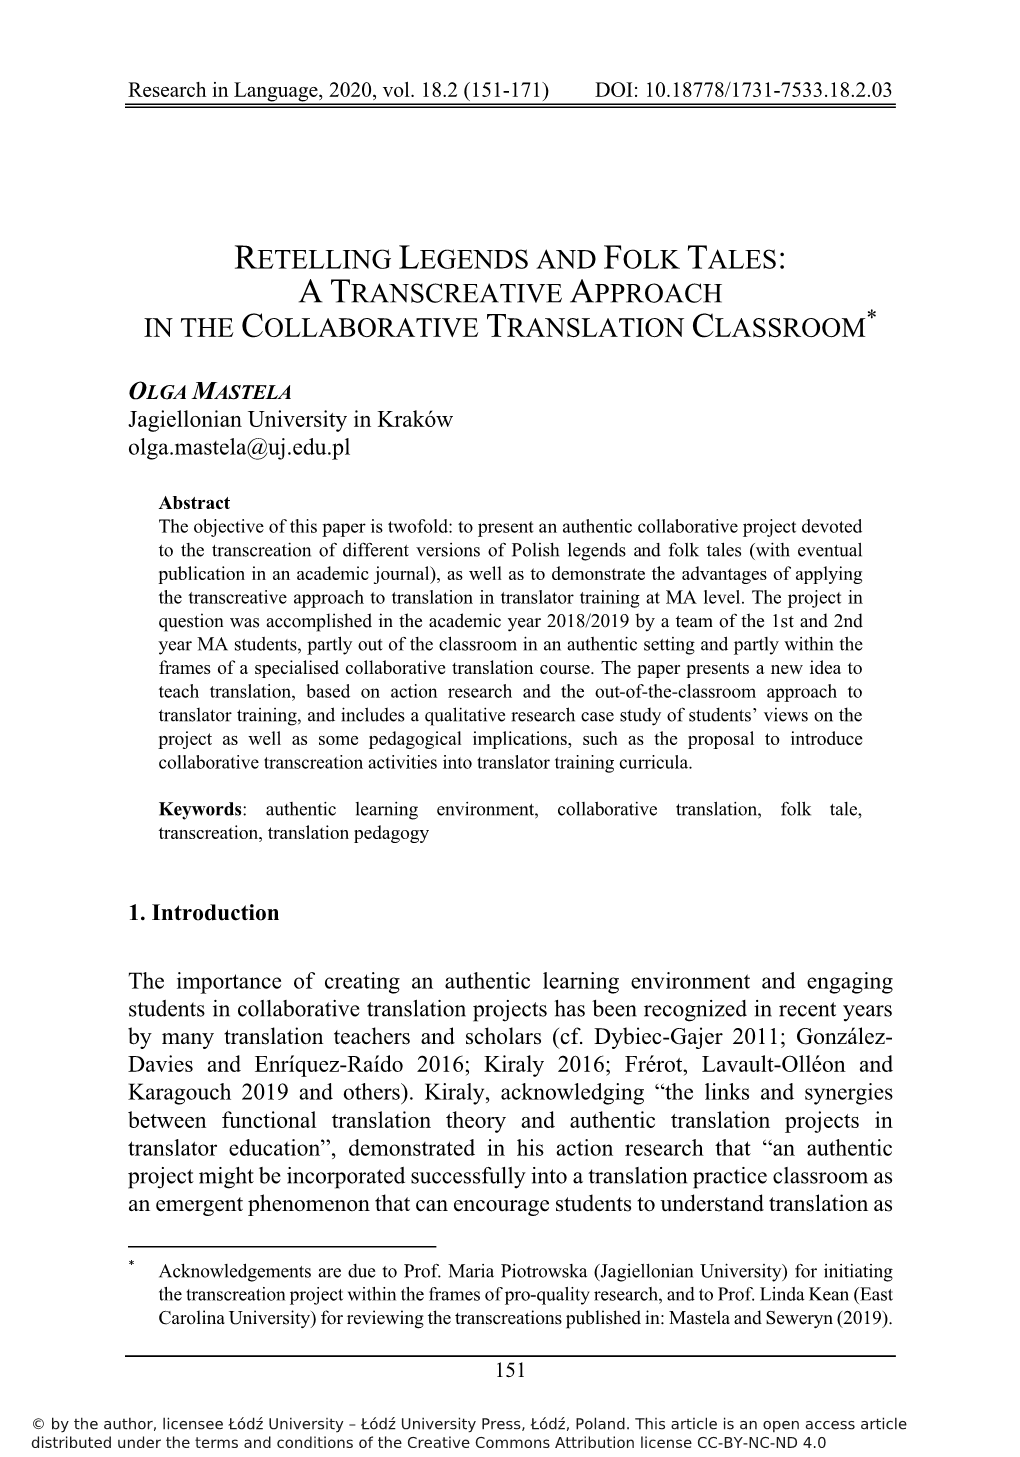 Retelling Legends and Folk Tales: a Transcreative Approach in the Collaborative Translation Classroom*